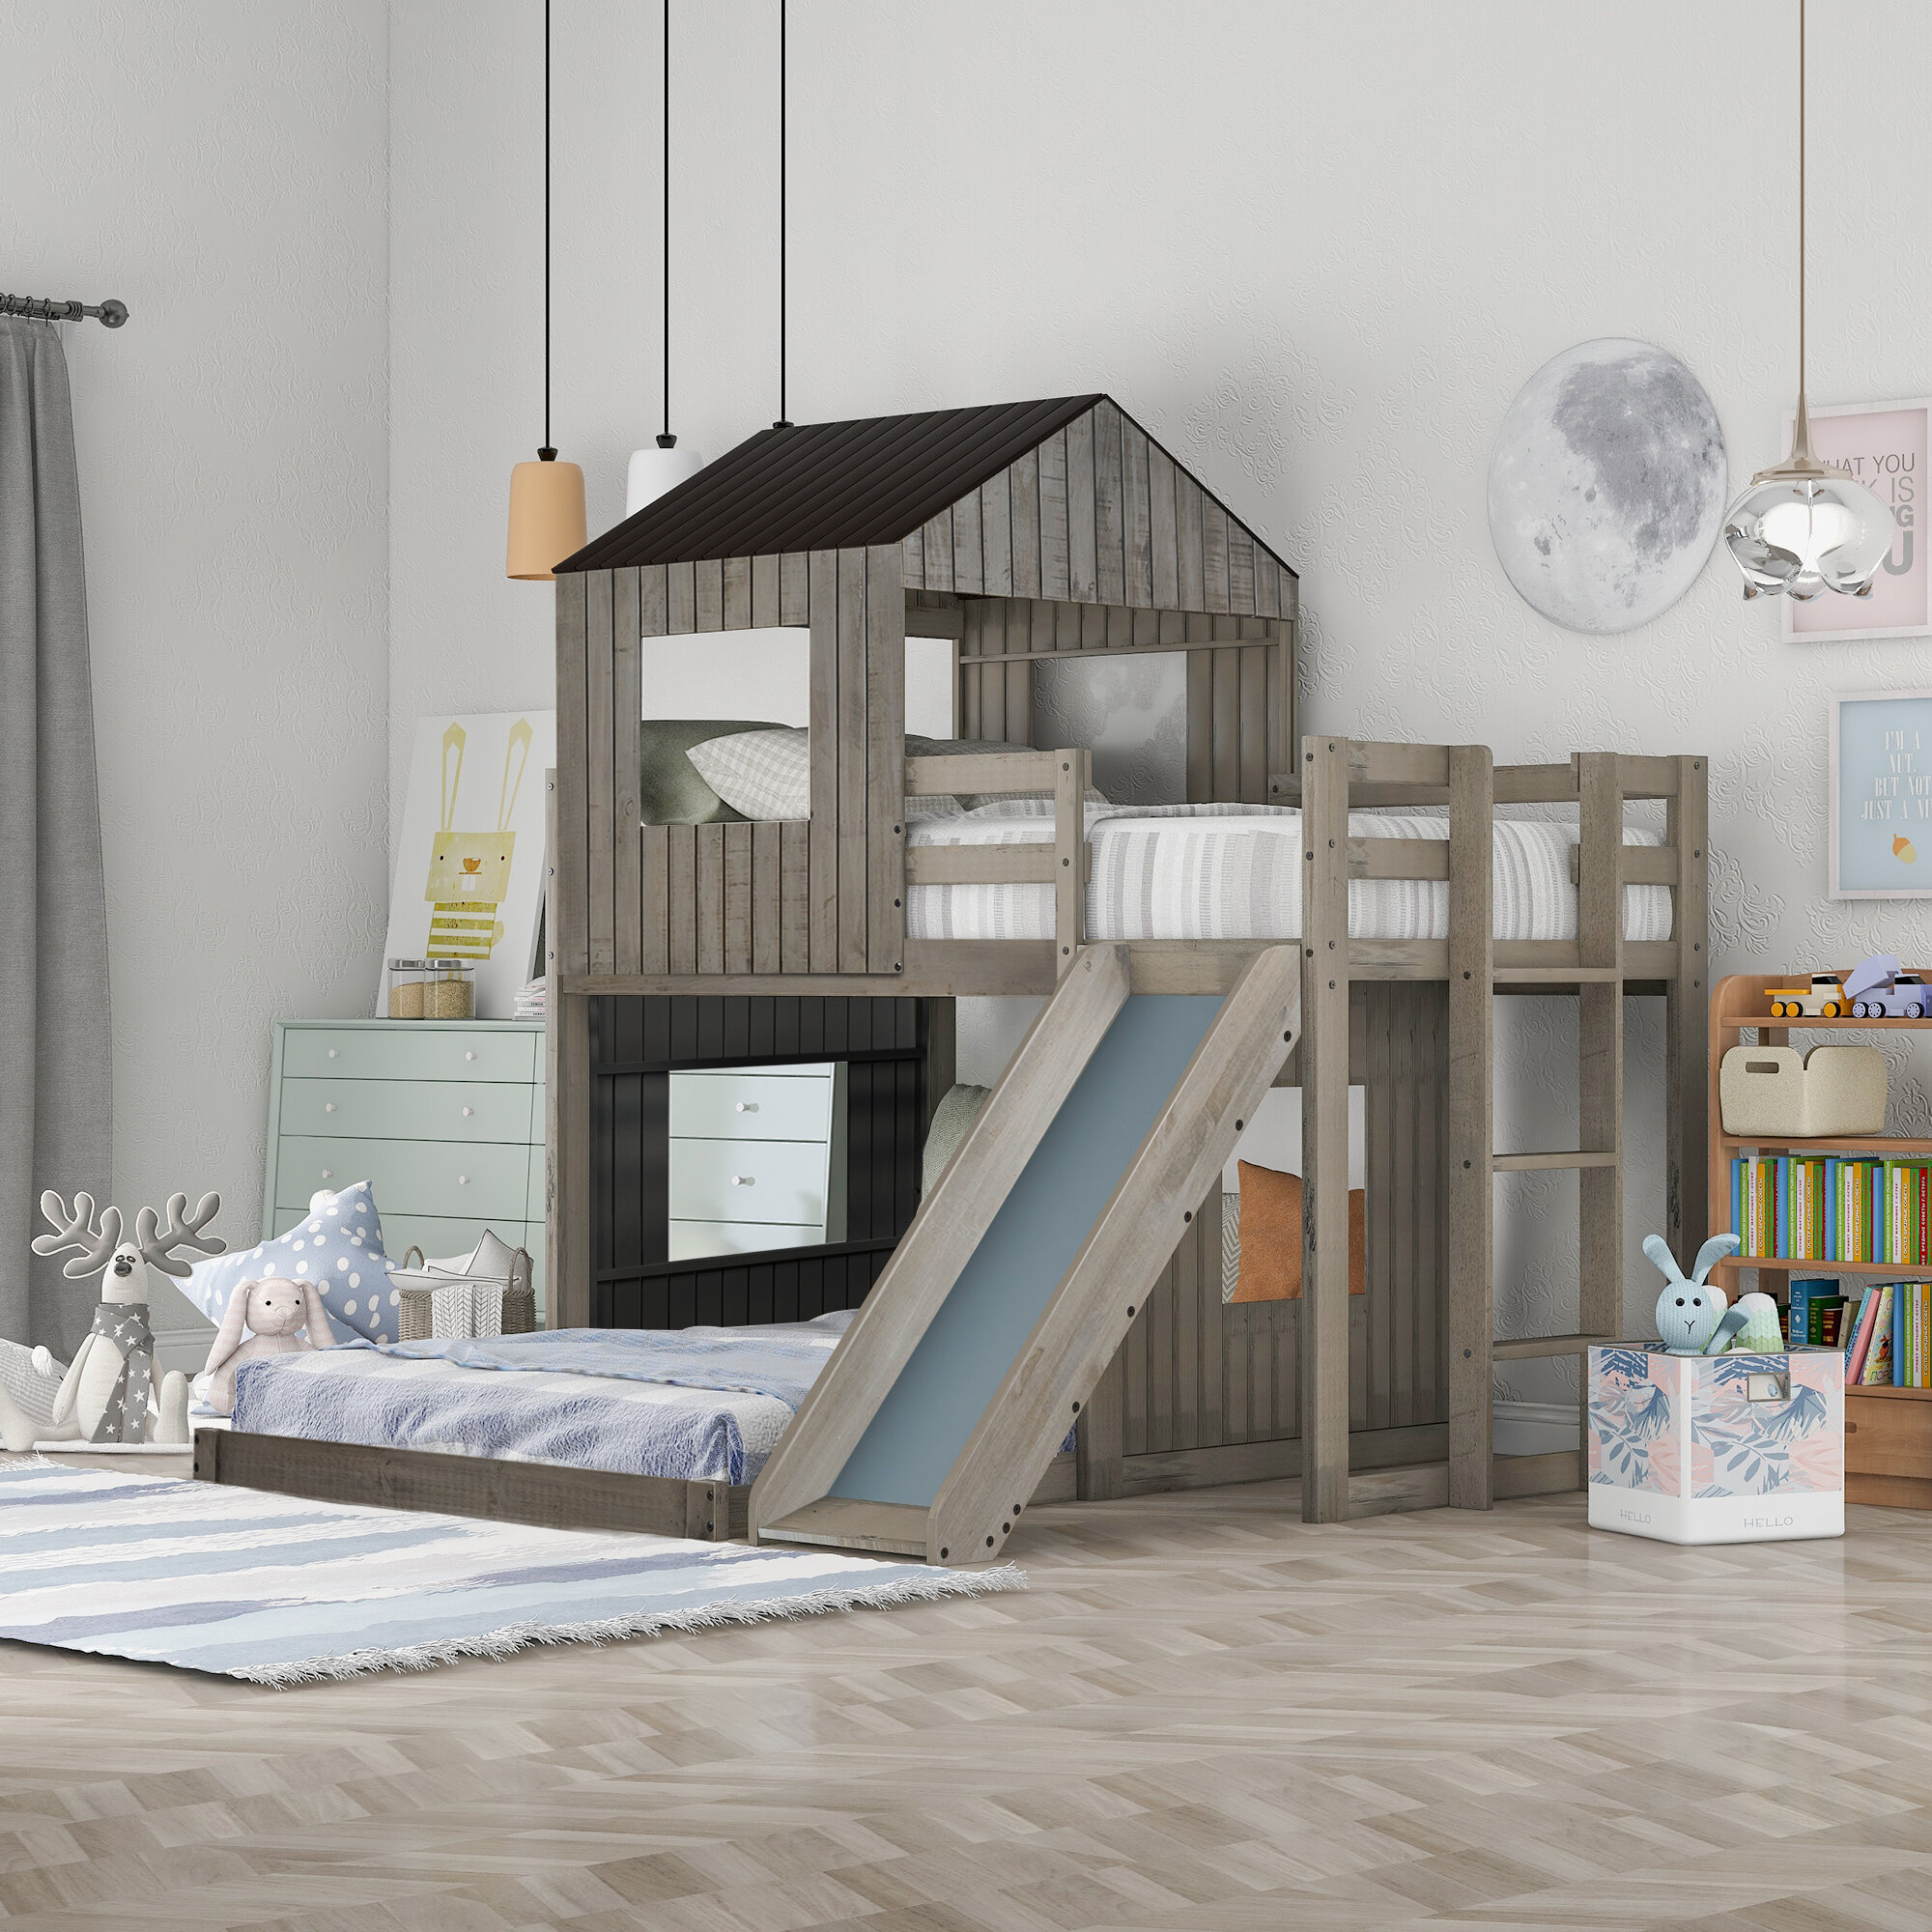 NORAN Wooden Twin Over Full Bunk Bed, Loft Bed with Playhouse, Farmhouse, Ladder &amp; Guardrails for Kids, Toddlers, Boys &amp; Girls (Antique Gray, Twin Loft Bed with Slide)